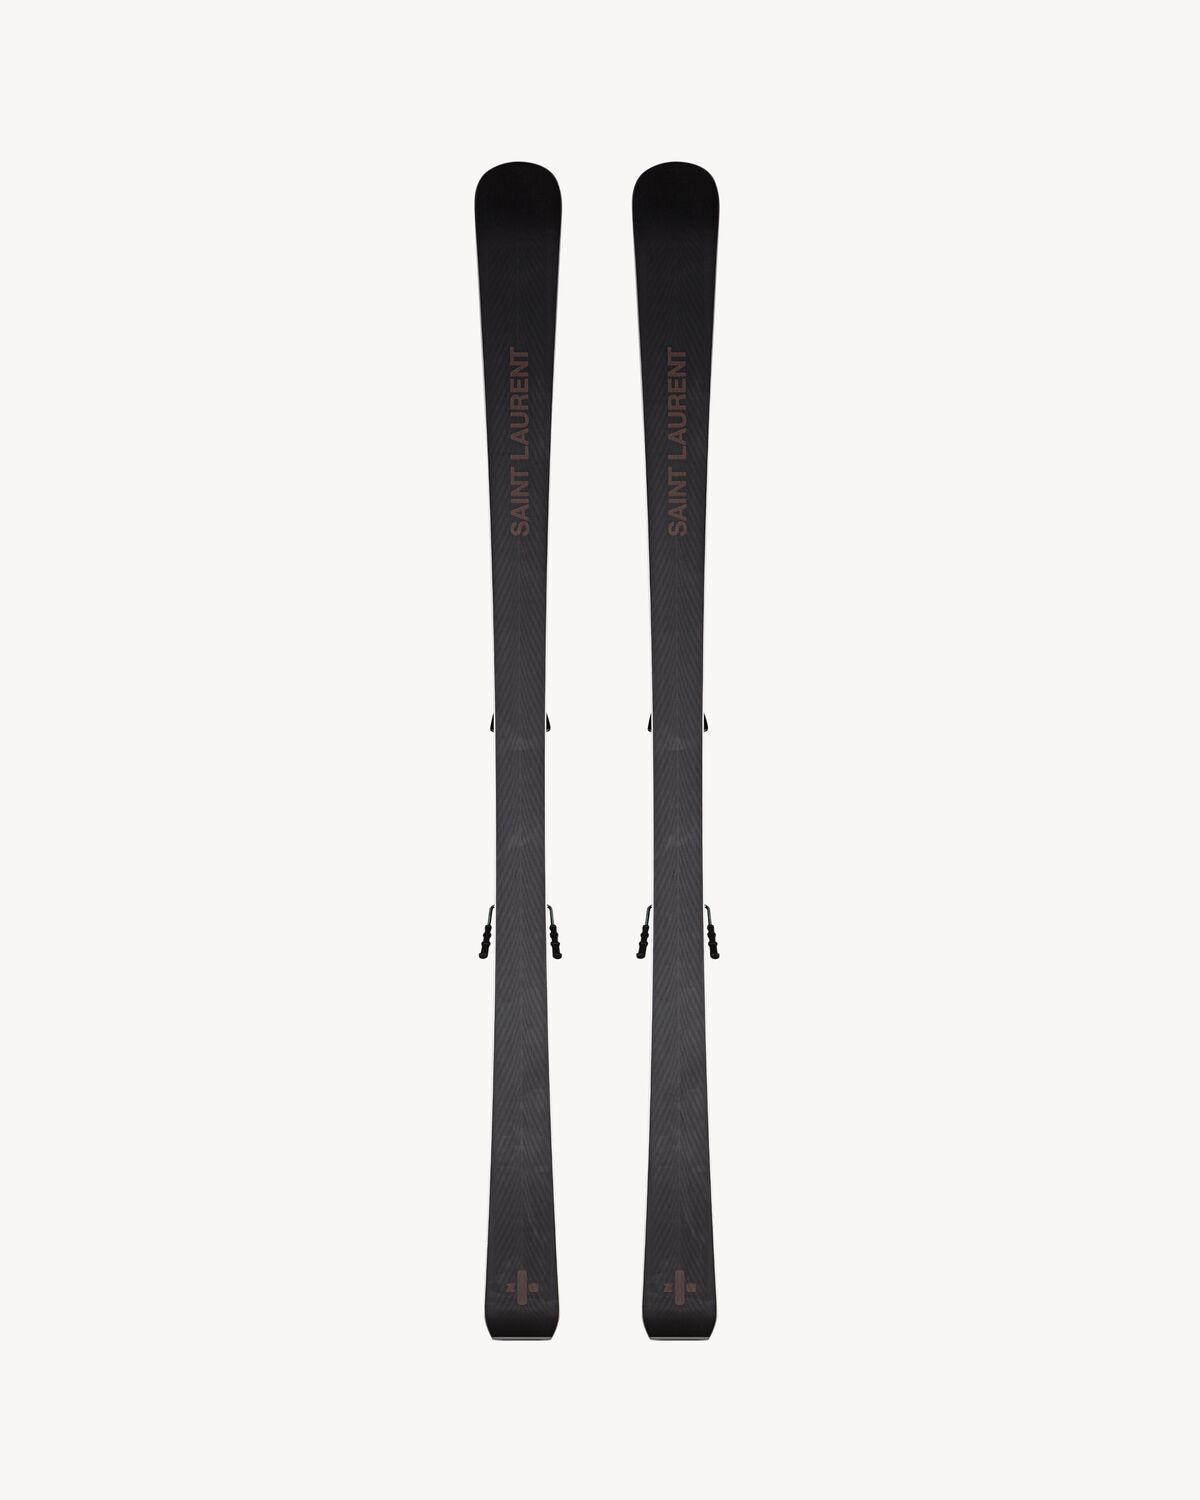 Zai Saint Laurent skis in wood and rubber